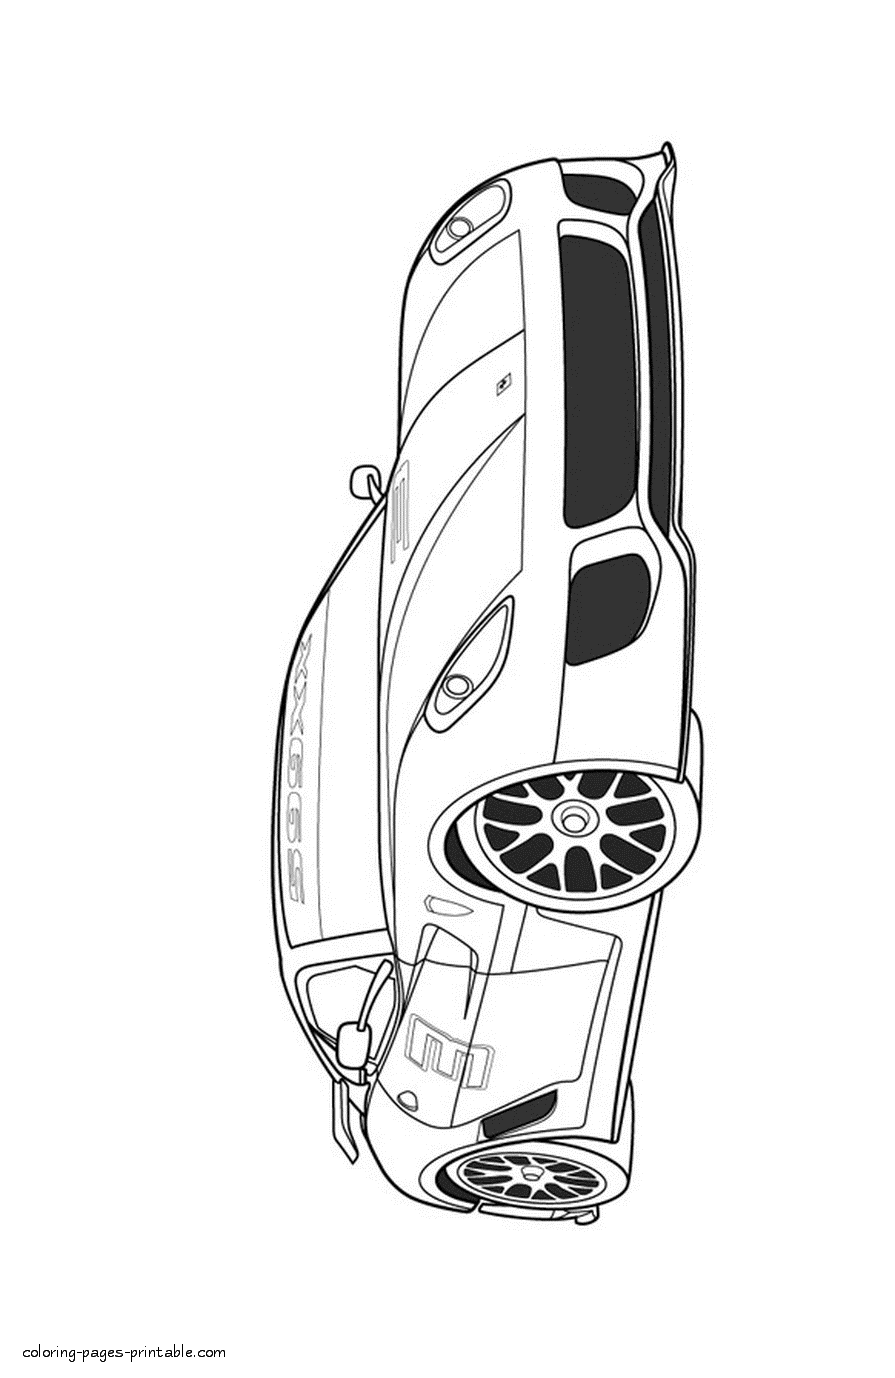 Coloring pages of the Ferrari 599XX for free